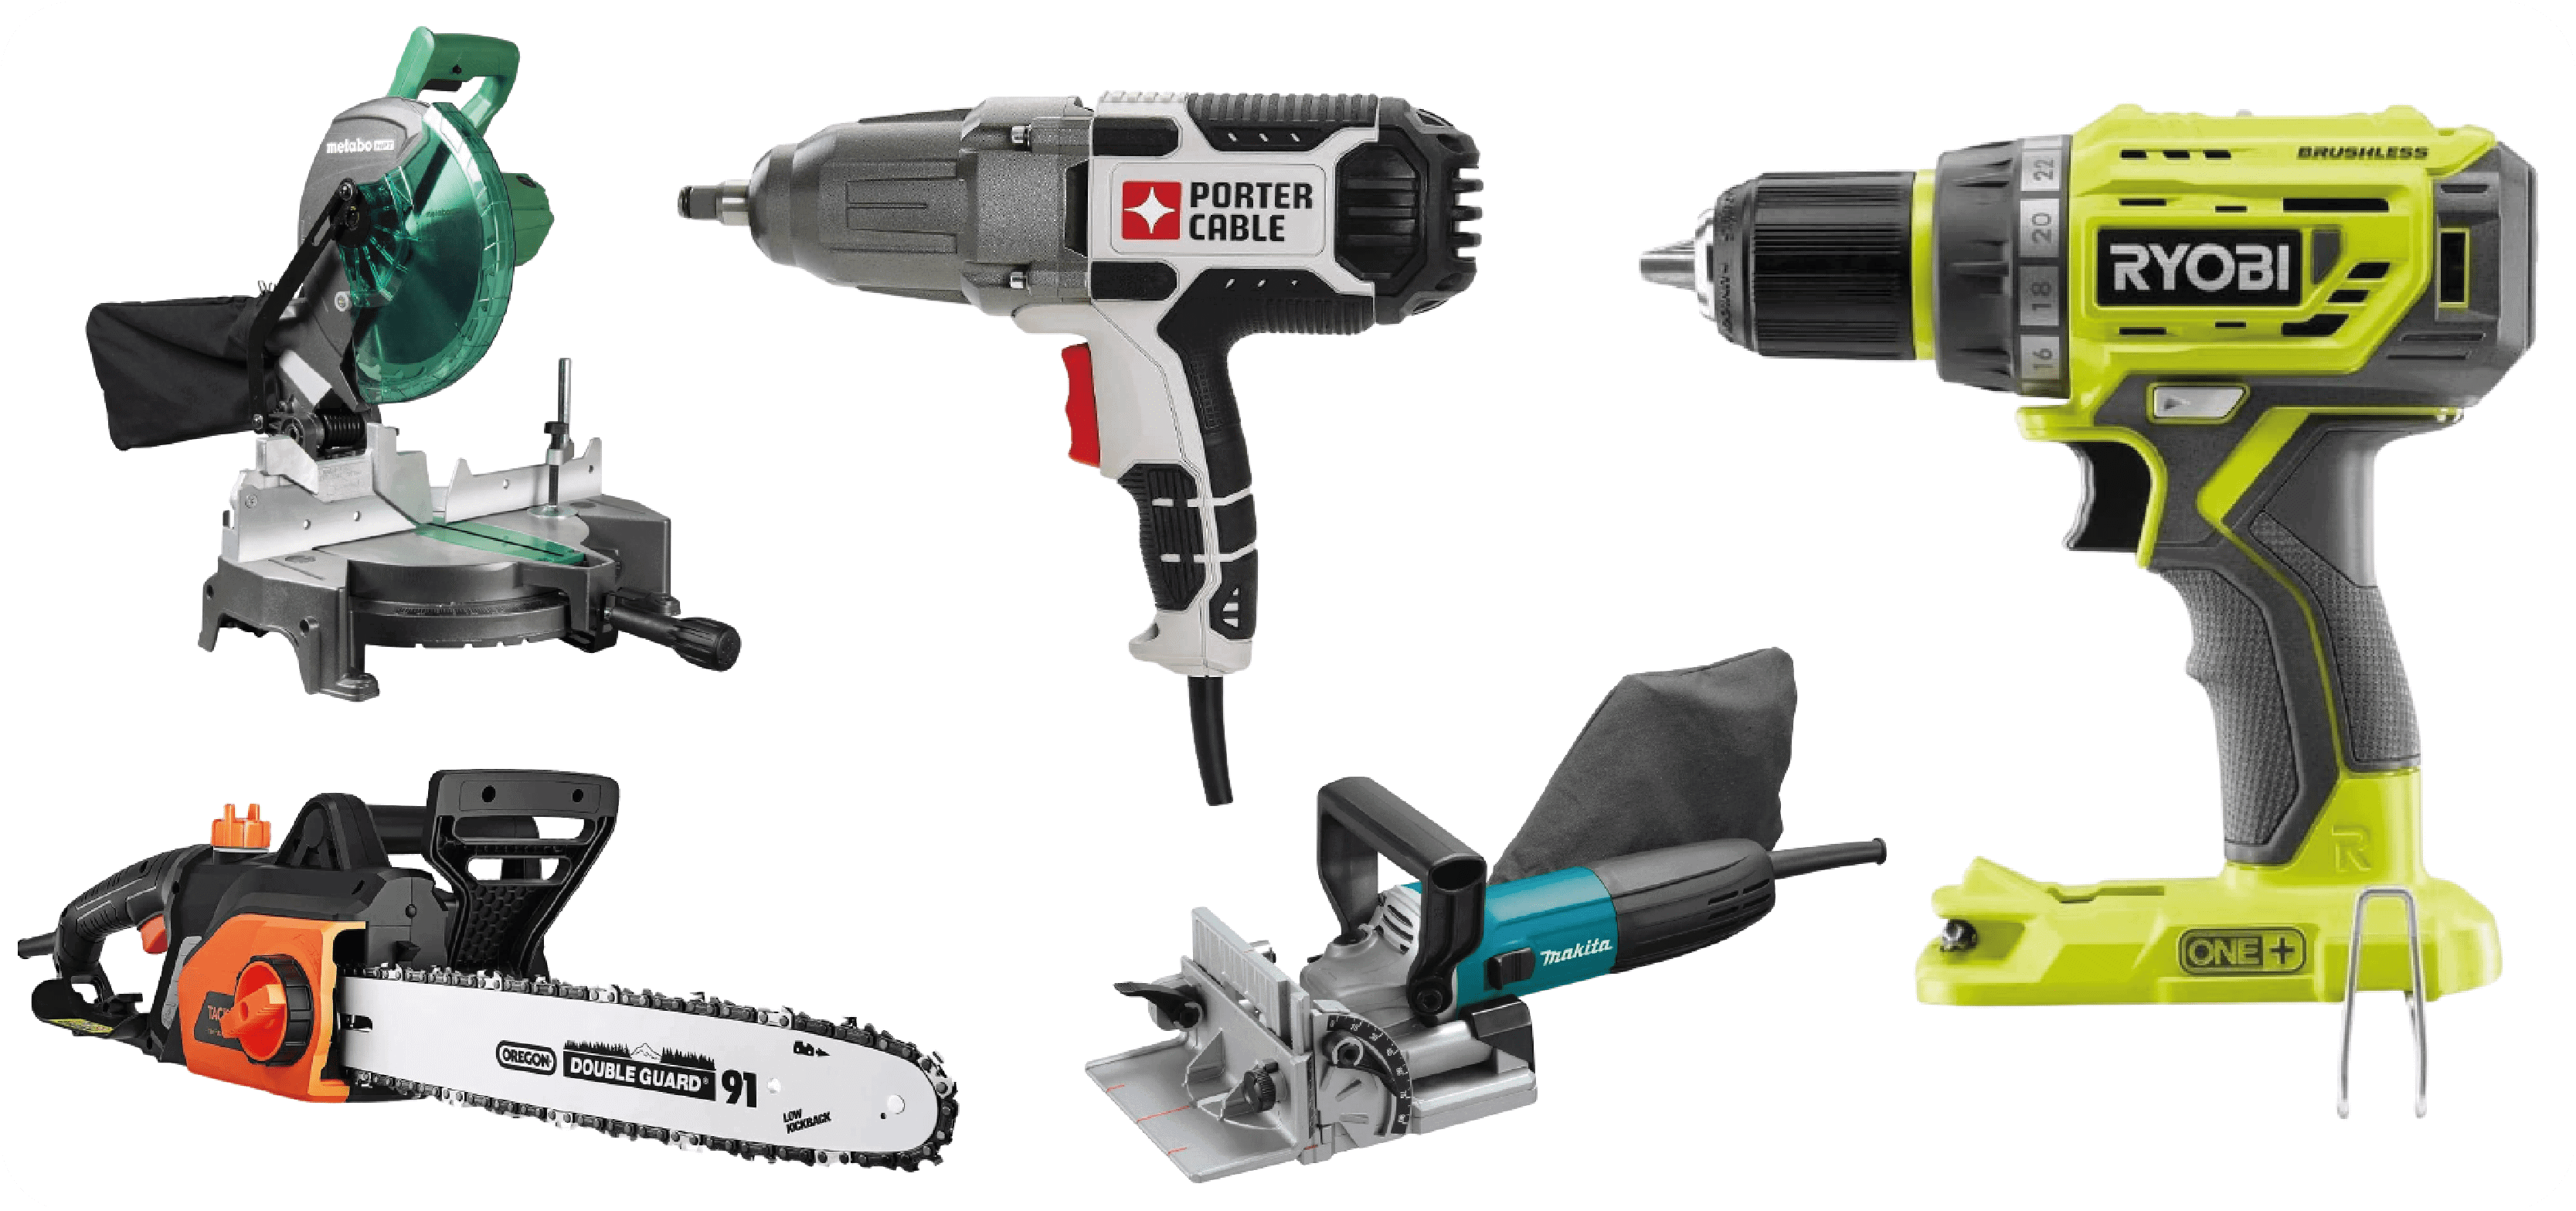 The Essential Power Tools List: 30 Different Types Everyone Should Own